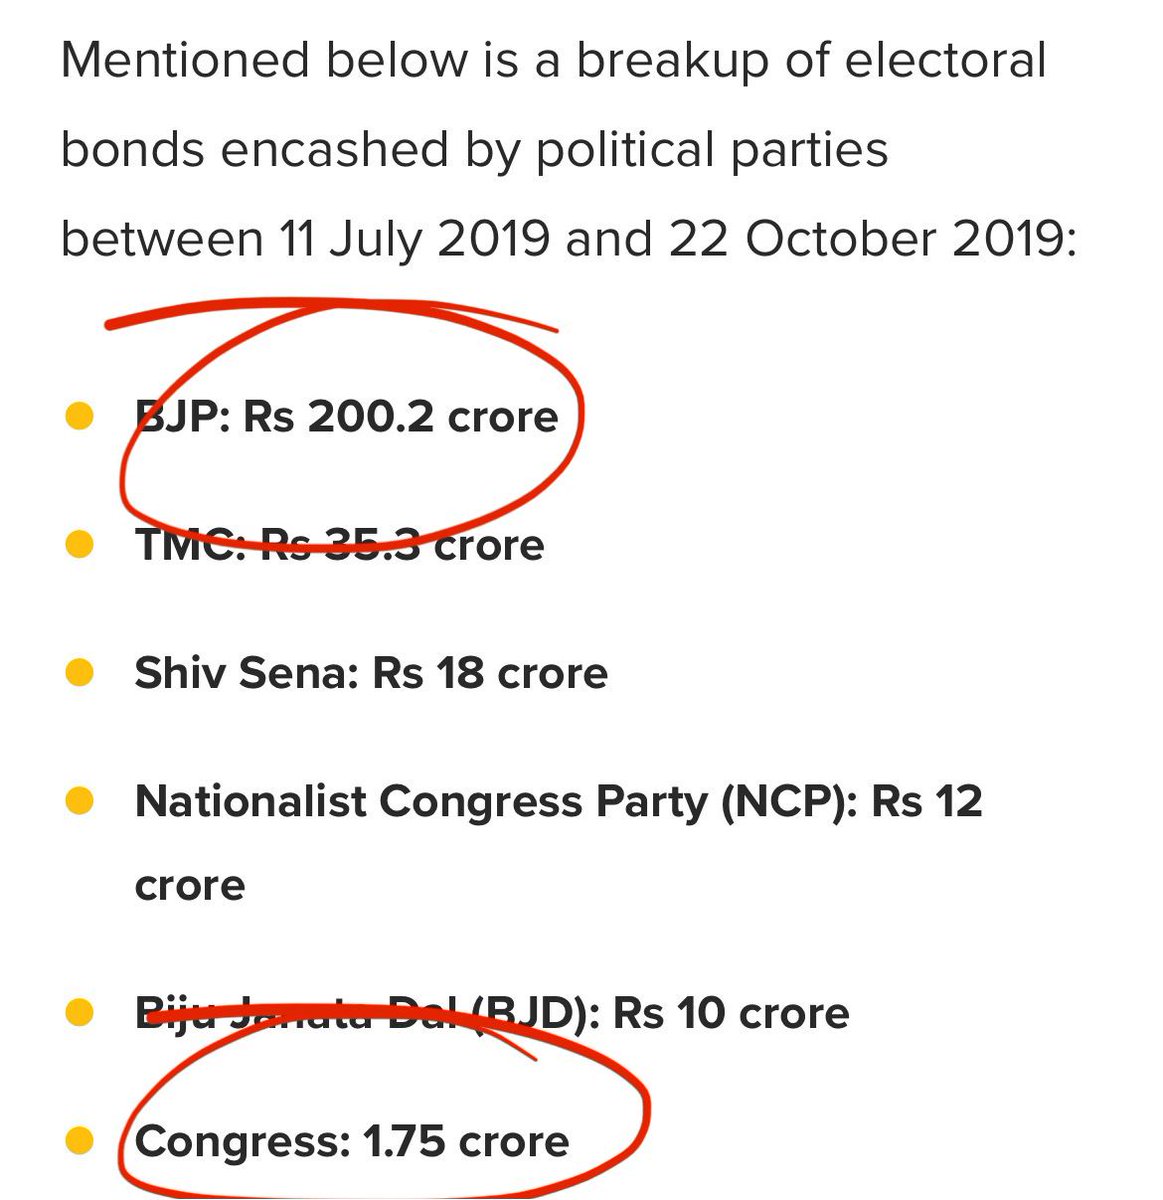 🧵#ElectoralBonds encashed by parties in the run-up to the 2019 Maharashtra and Haryana state Assembly polls. BJP with Rs 200 crore was about 5 times ahead of TMC and 12 times ahead of Shiv Sena. Congress, which contested in both states, got Rs 1.75 crore. There's more ++